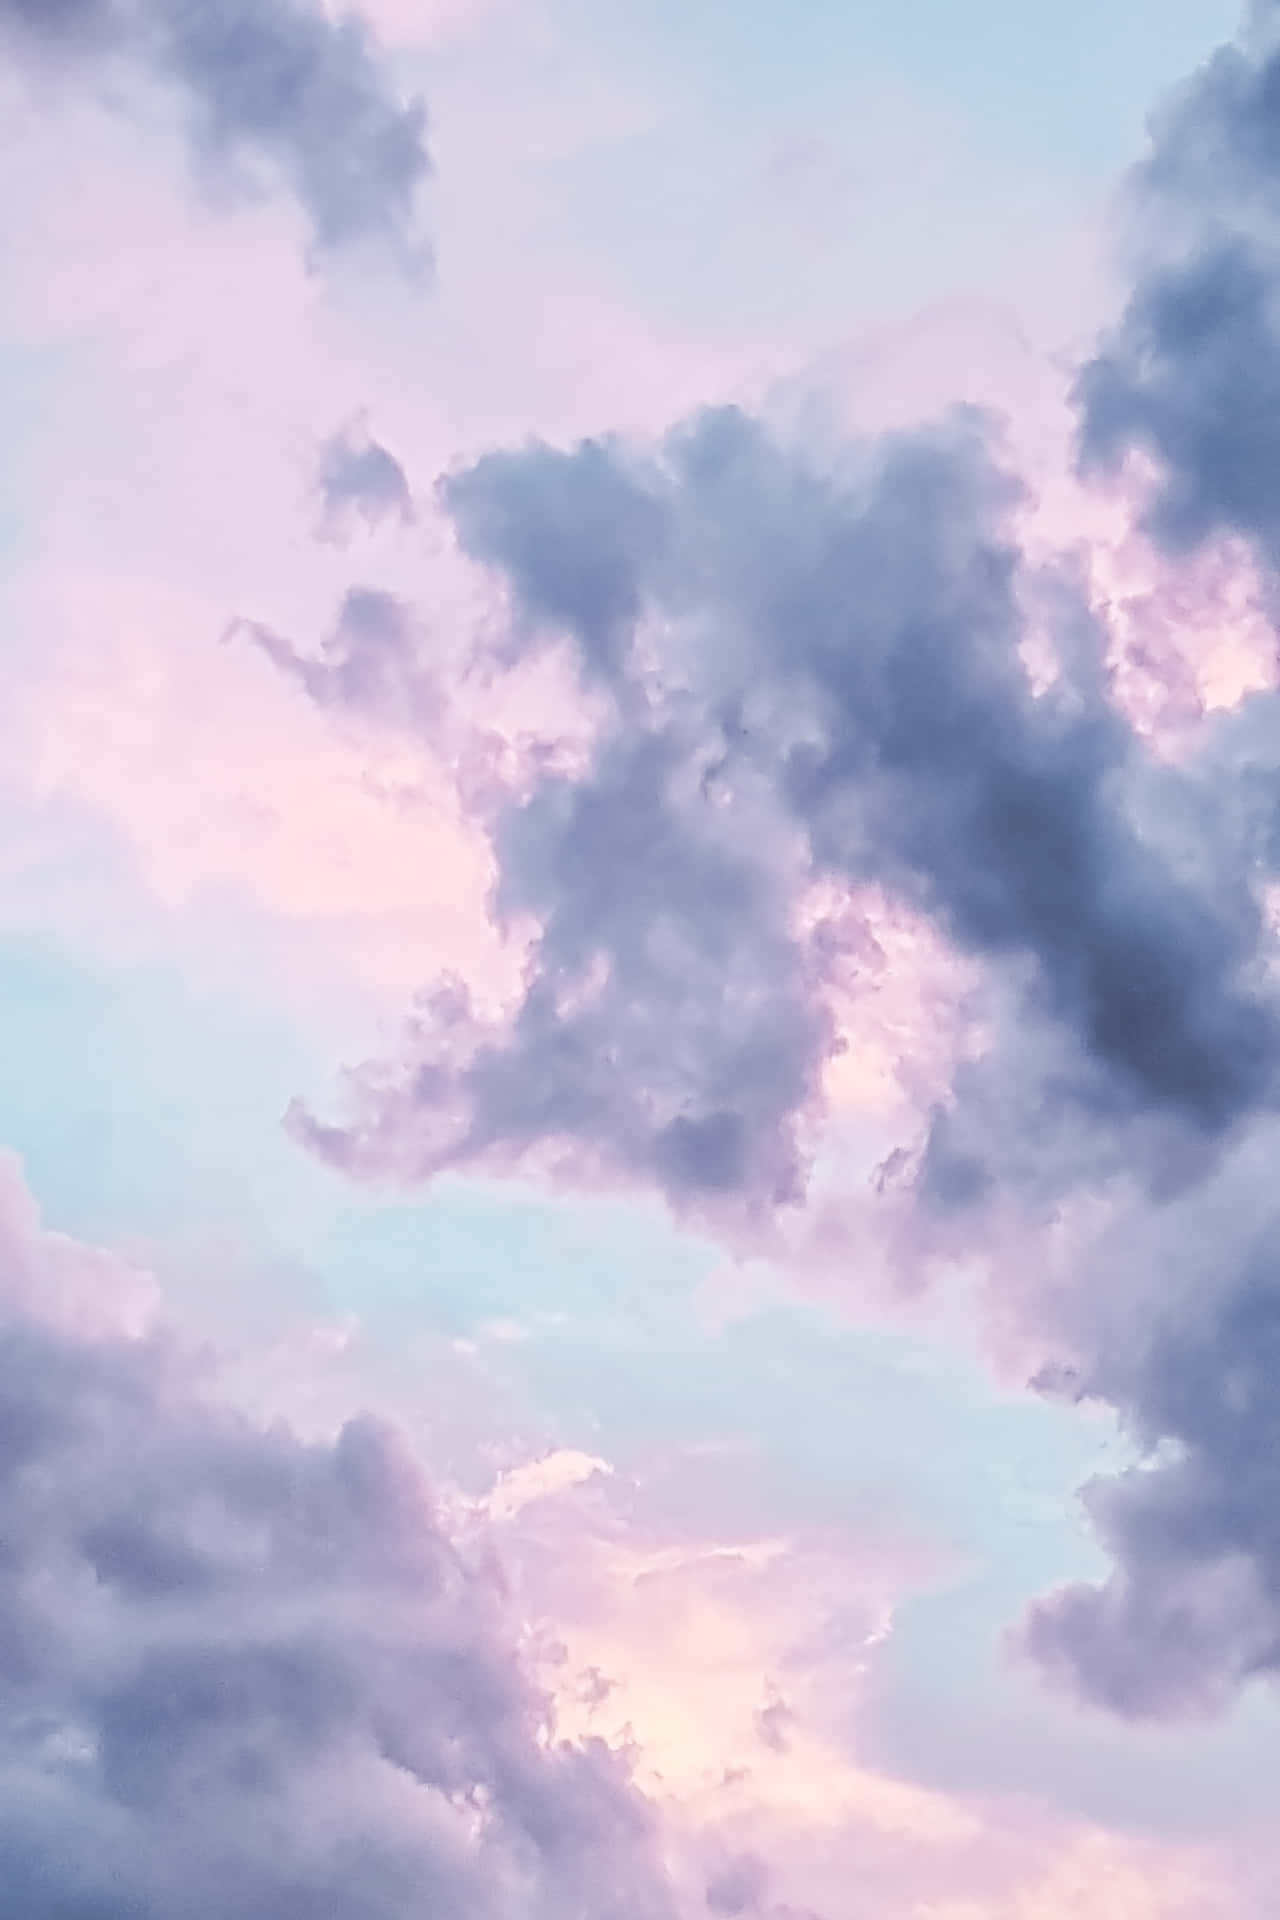 A soothing blend of pastel pink and purple Wallpaper